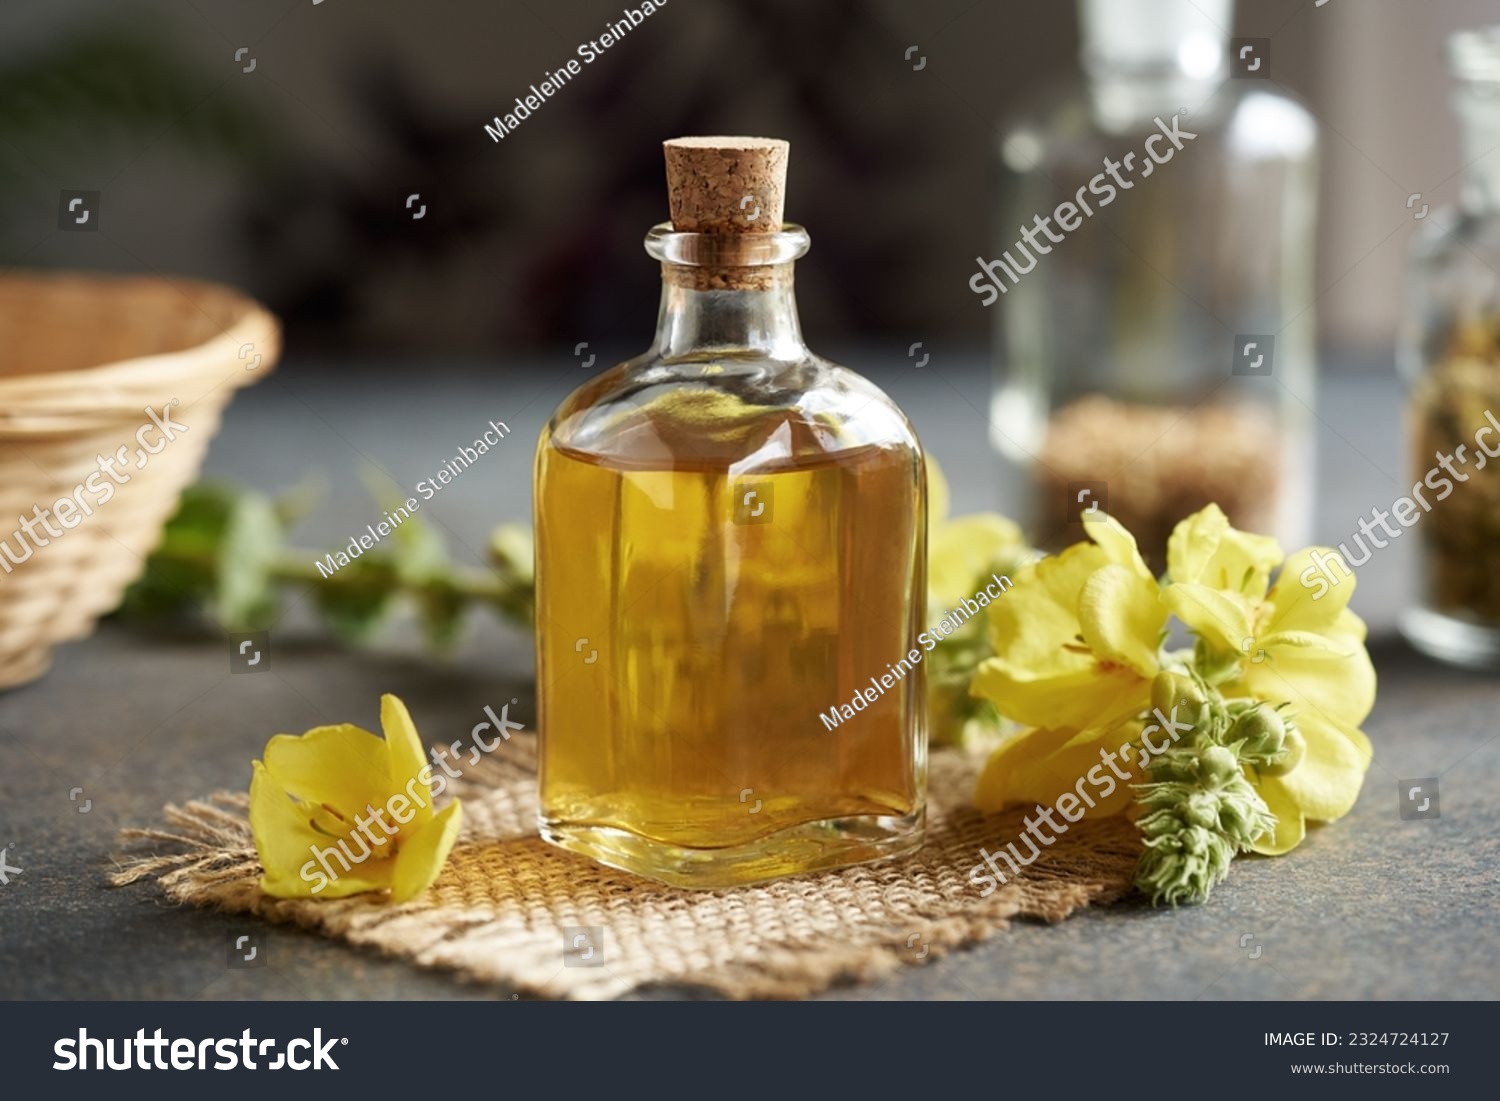 A bottle of mullein or Verbascum tincture with fresh plant on a table #2324724127